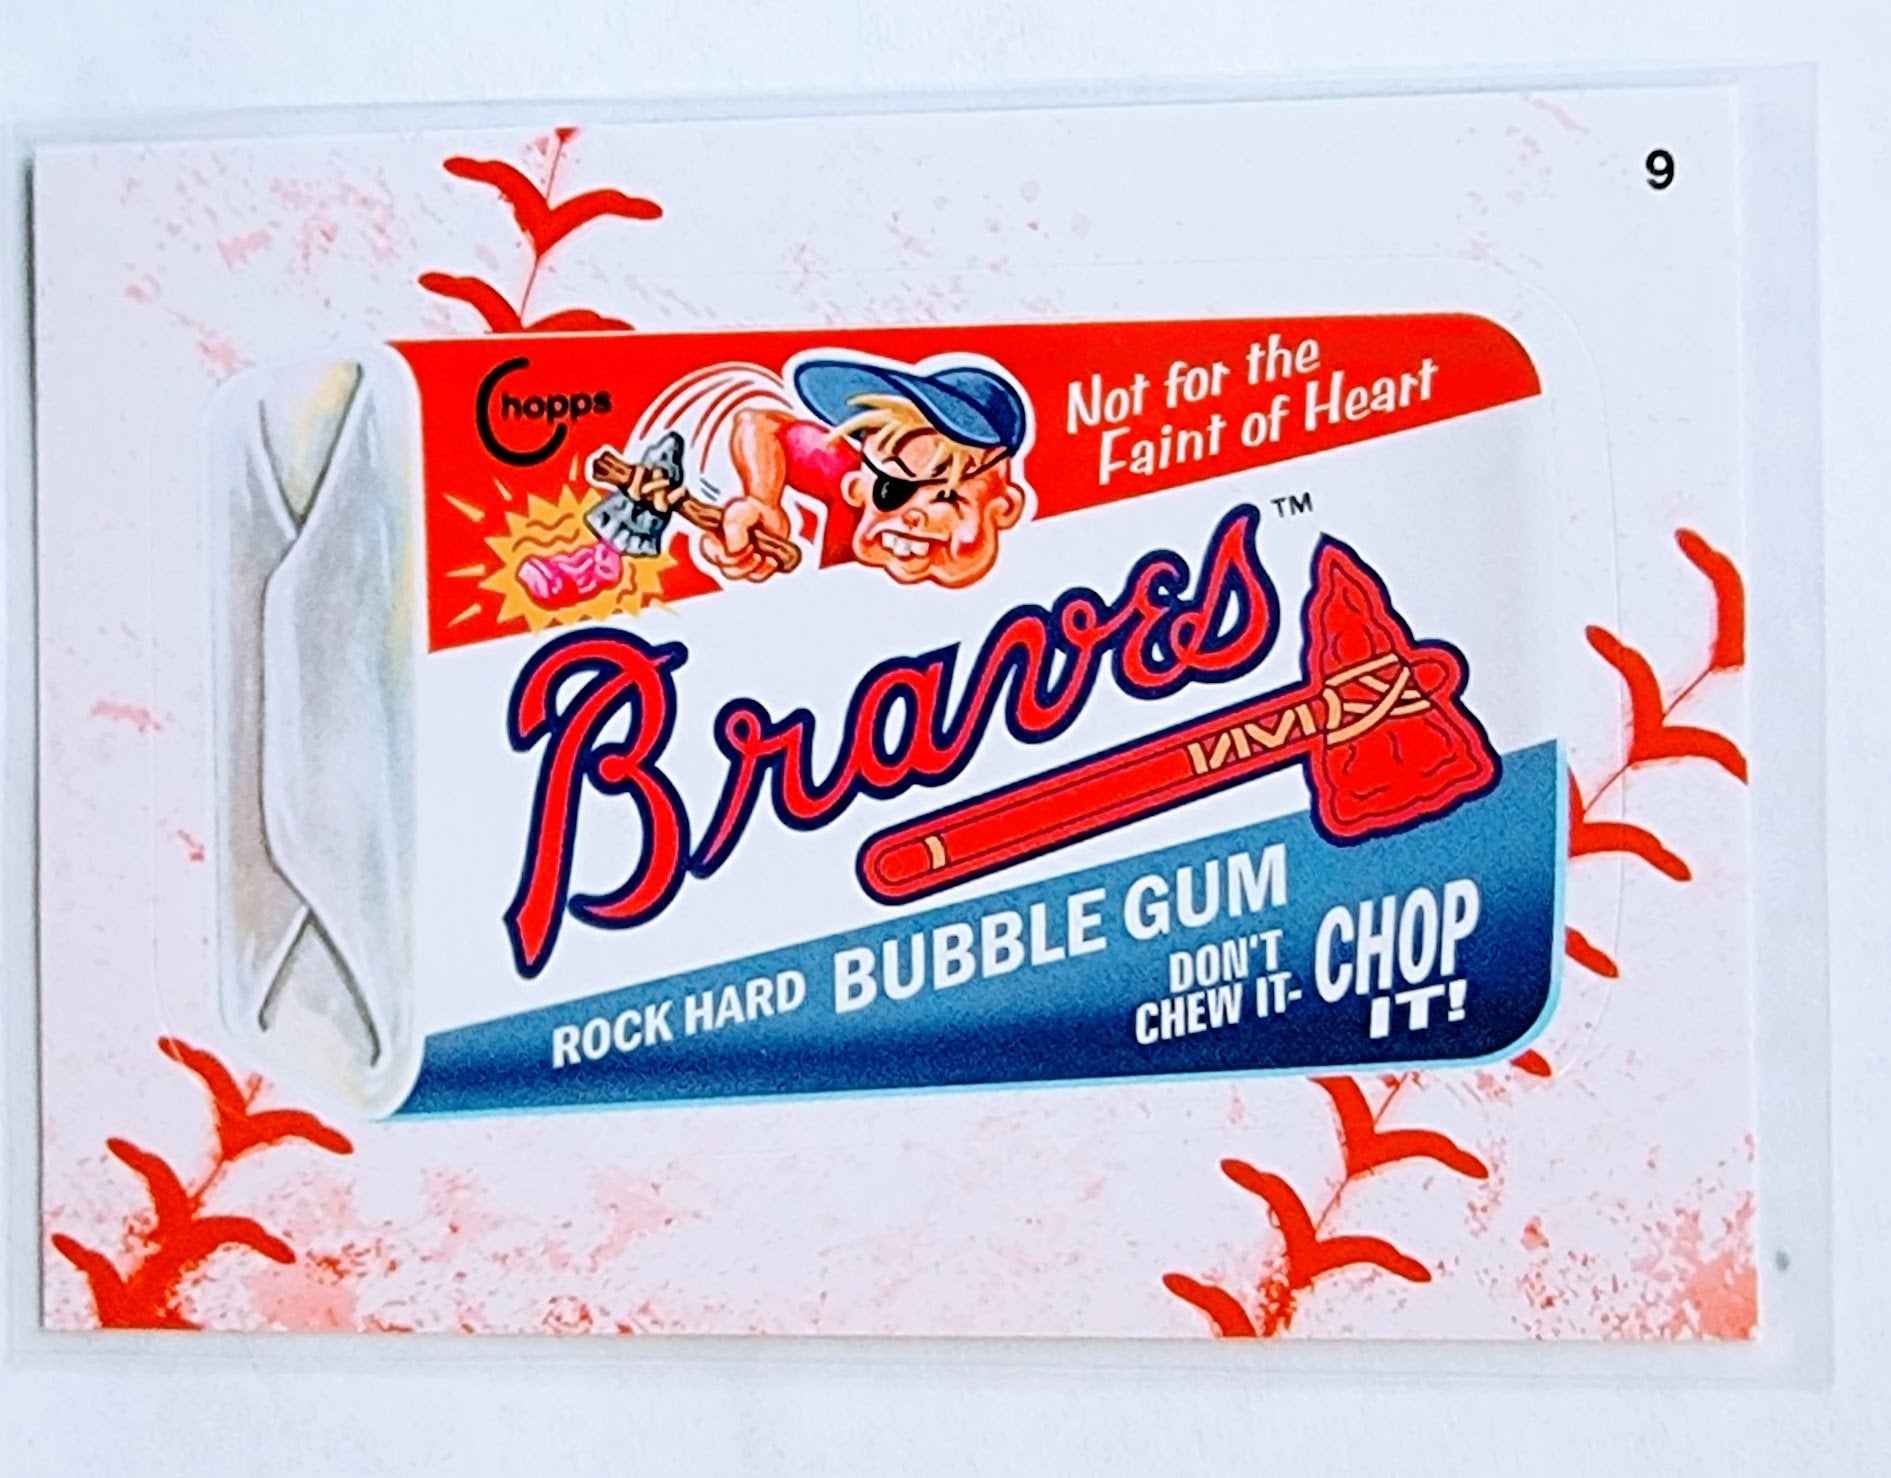 2016 Topps MLB Baseball Wacky Packages Braves Rock Hard Bubble Gum Lace Parallel Sticker Trading Card MCSC1 simple Xclusive Collectibles   